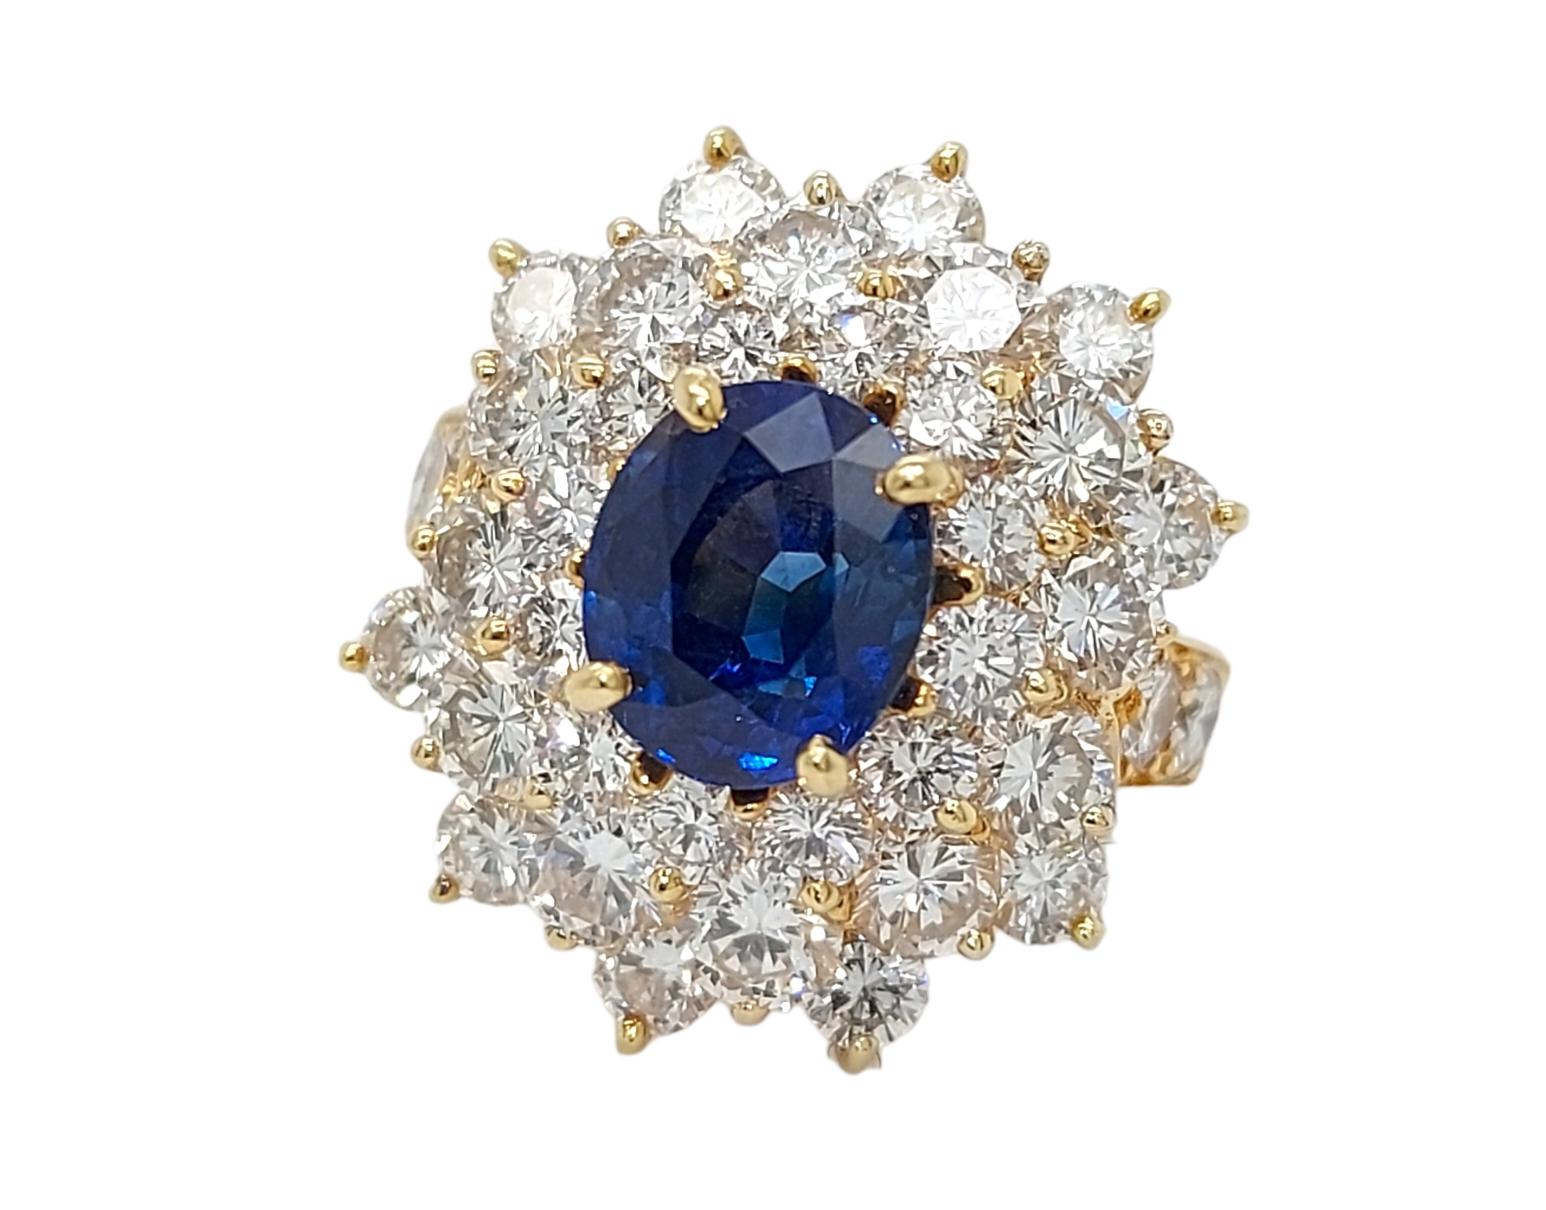 18 kt Yellow Gold Ring with 2ct Sapphire and 2.8ct Diamonds, Estate Sultan Oman For Sale 4